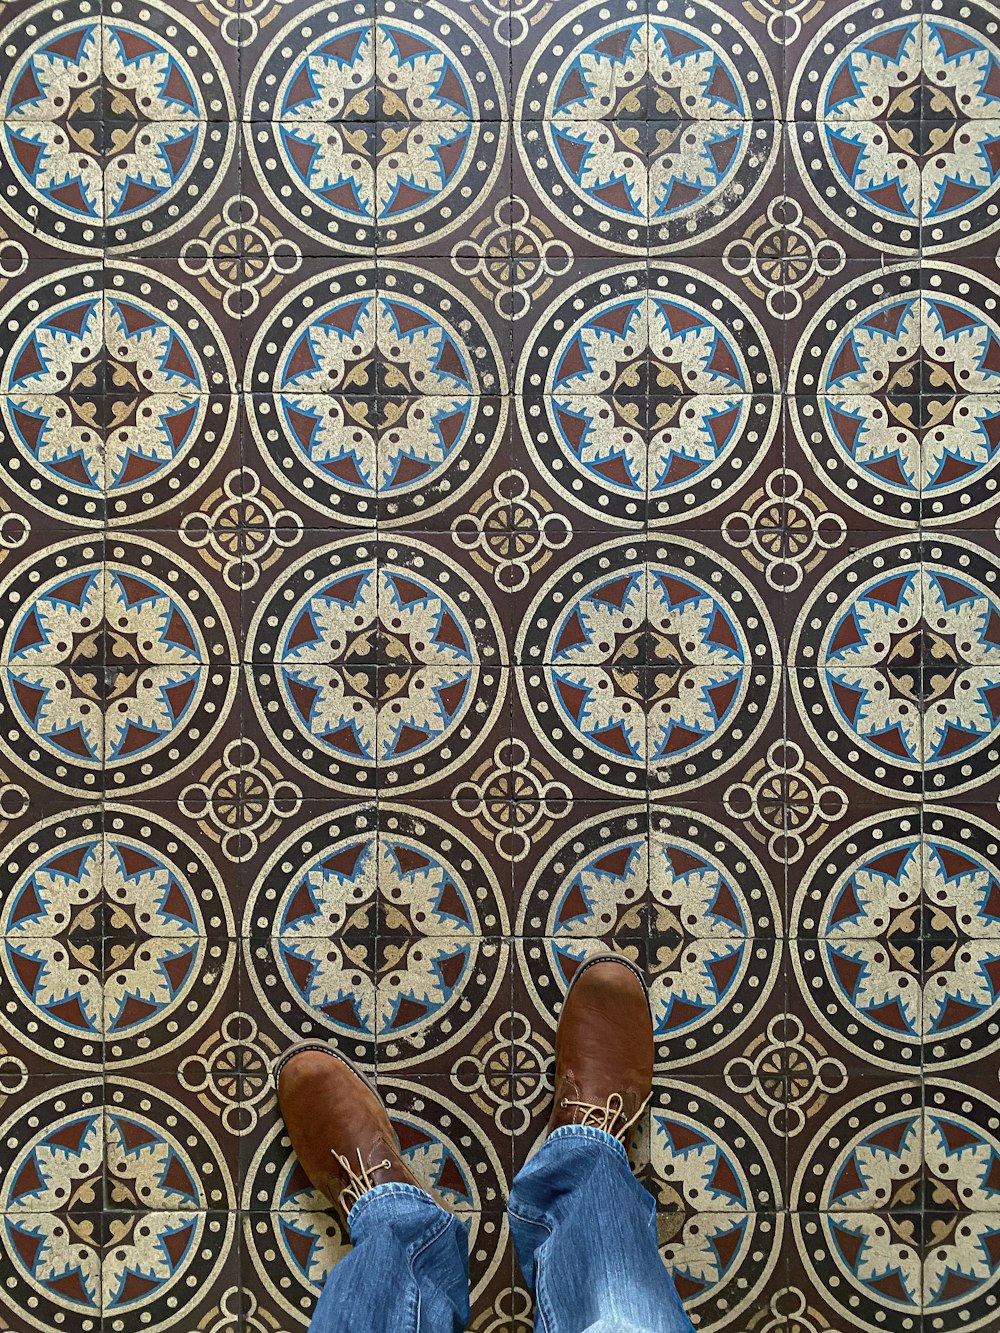 a person standing in front of a patterned floor